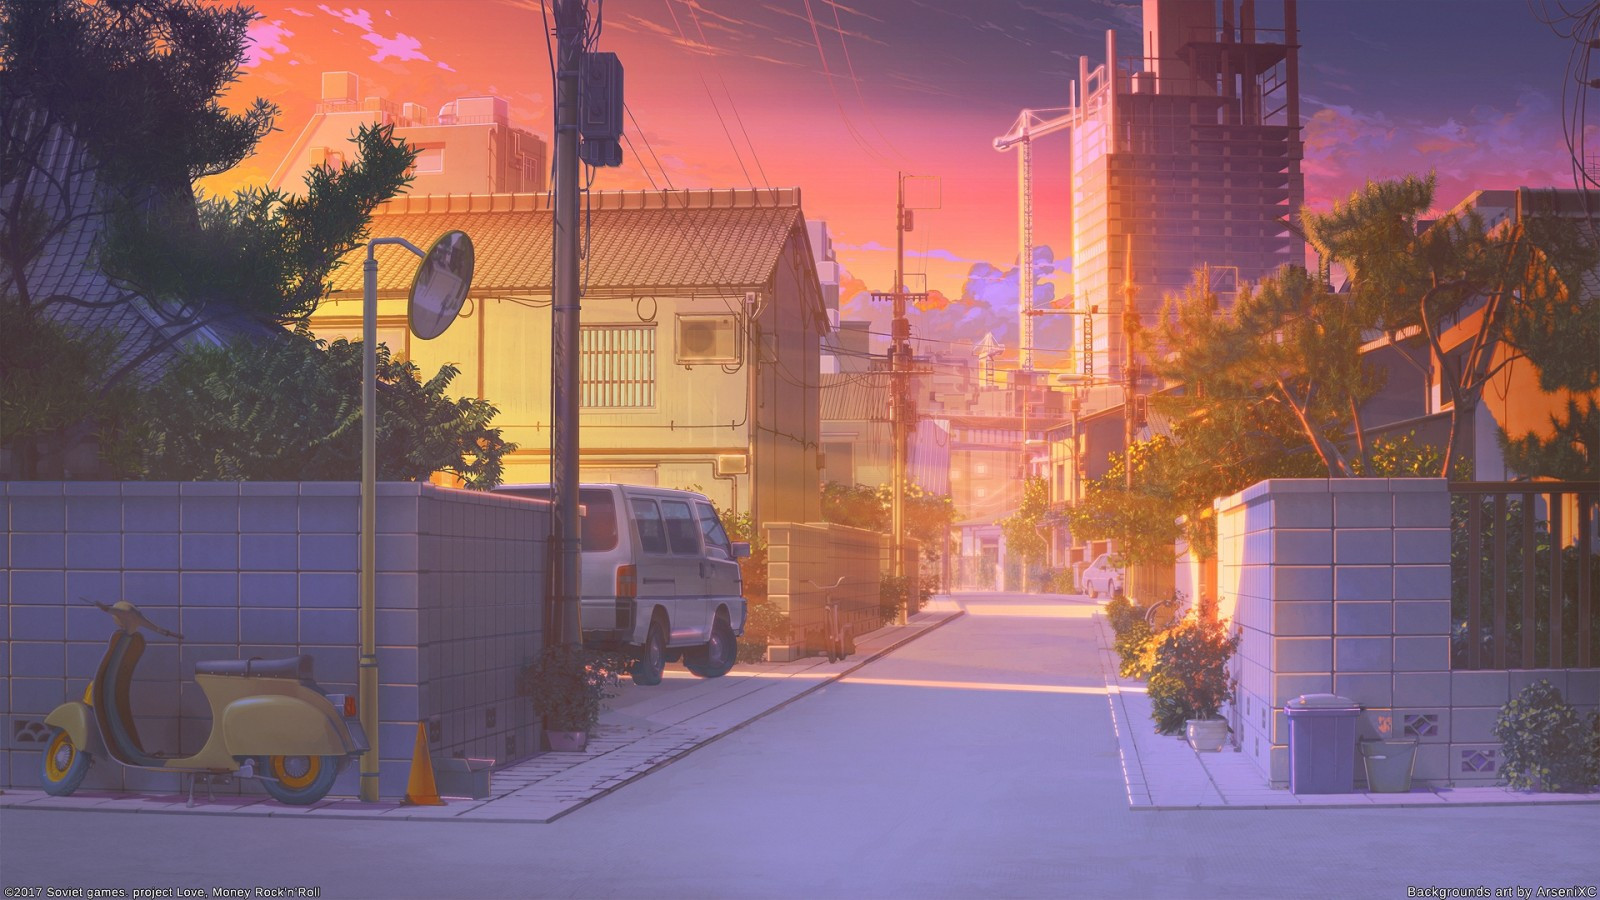 Download 1600x900 Anime Street, Scenic, Sunset, Buildings, Car, Wall Wallpaper